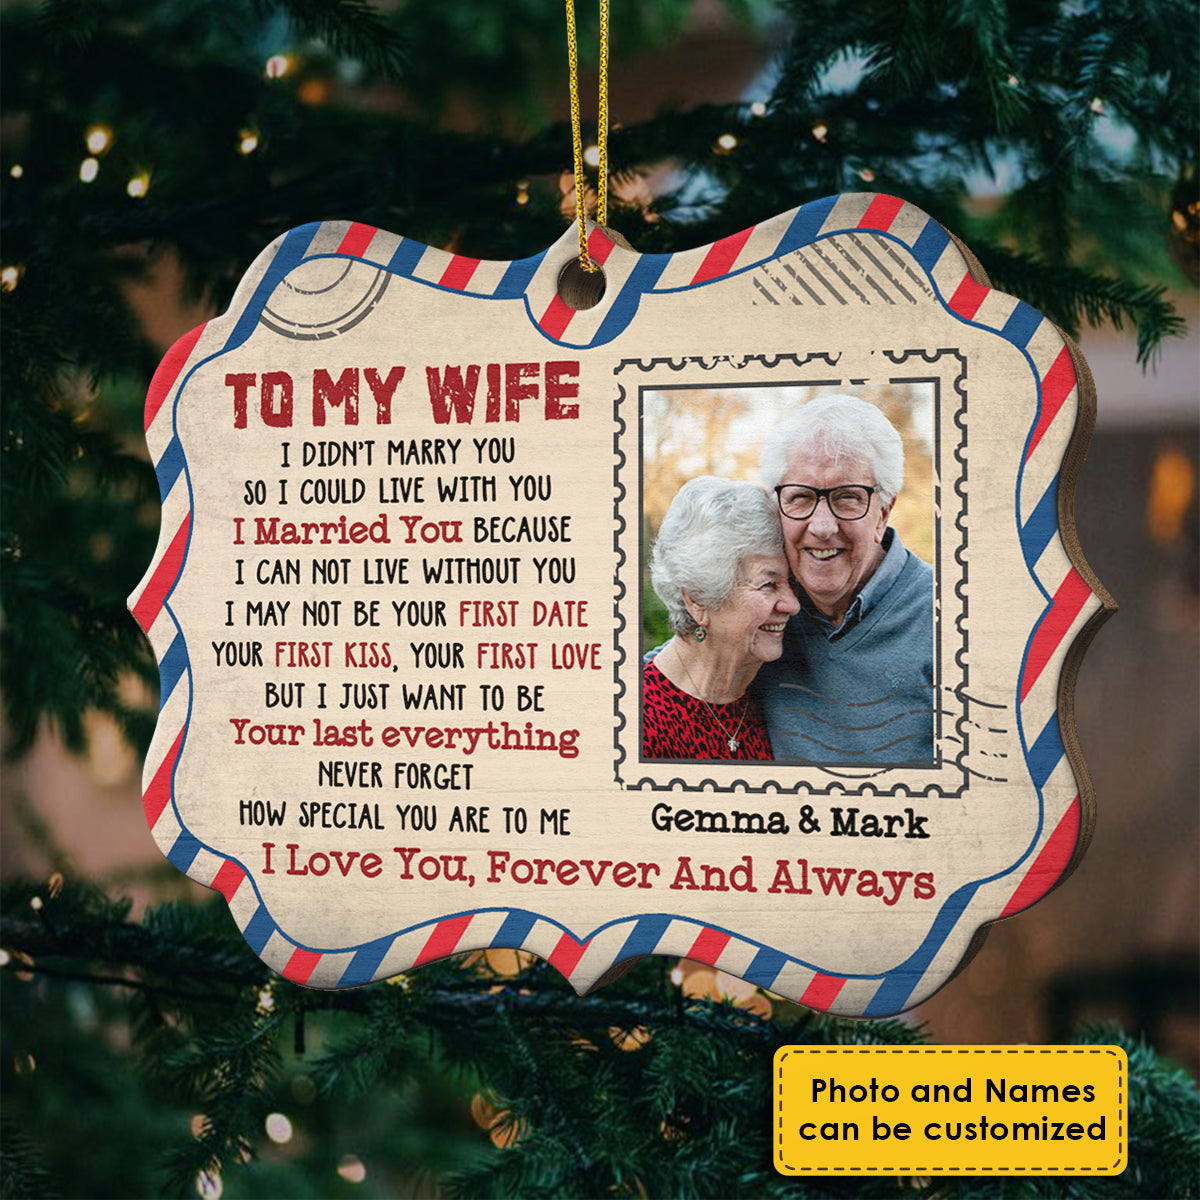 I Love You, Forever And Always - Upload Image, Gift For Couples - Personalized Shaped Ornament